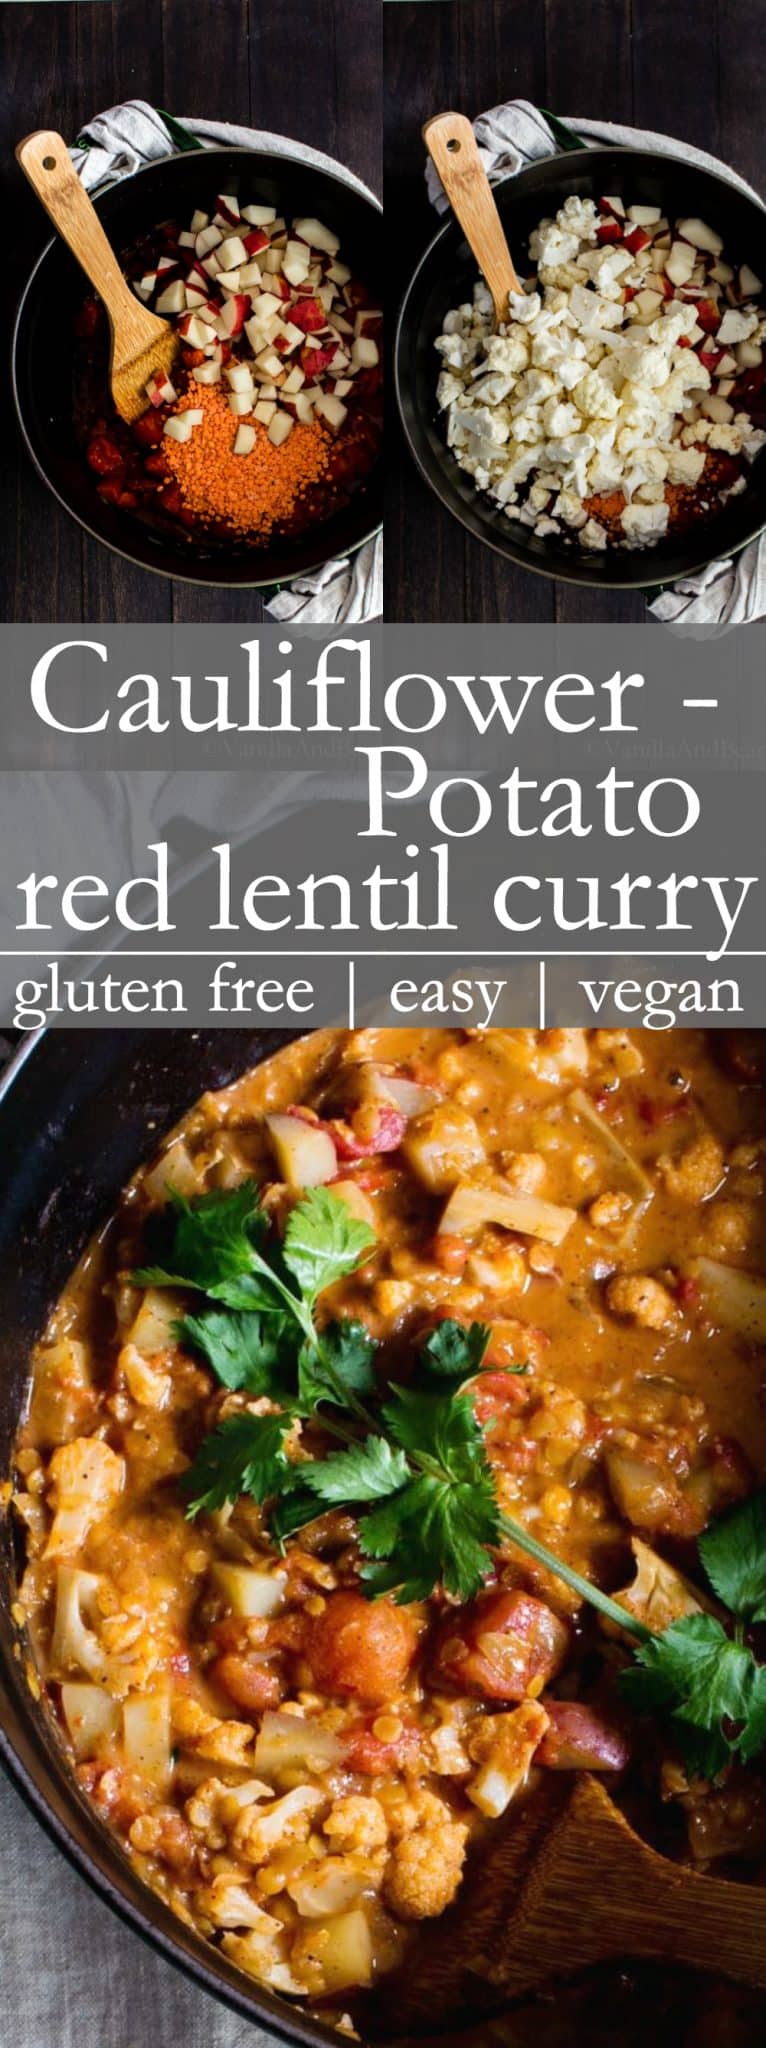 Hearty, rich and nourishing, Cauliflower-Potato Red Lentil Curry comes together with ease. Simple enough for a weeknight meal, this cauliflower curry is freezer friendly too. #CauliflowerCurry #PotatoCurry #VeganCurry #HealthyDinner